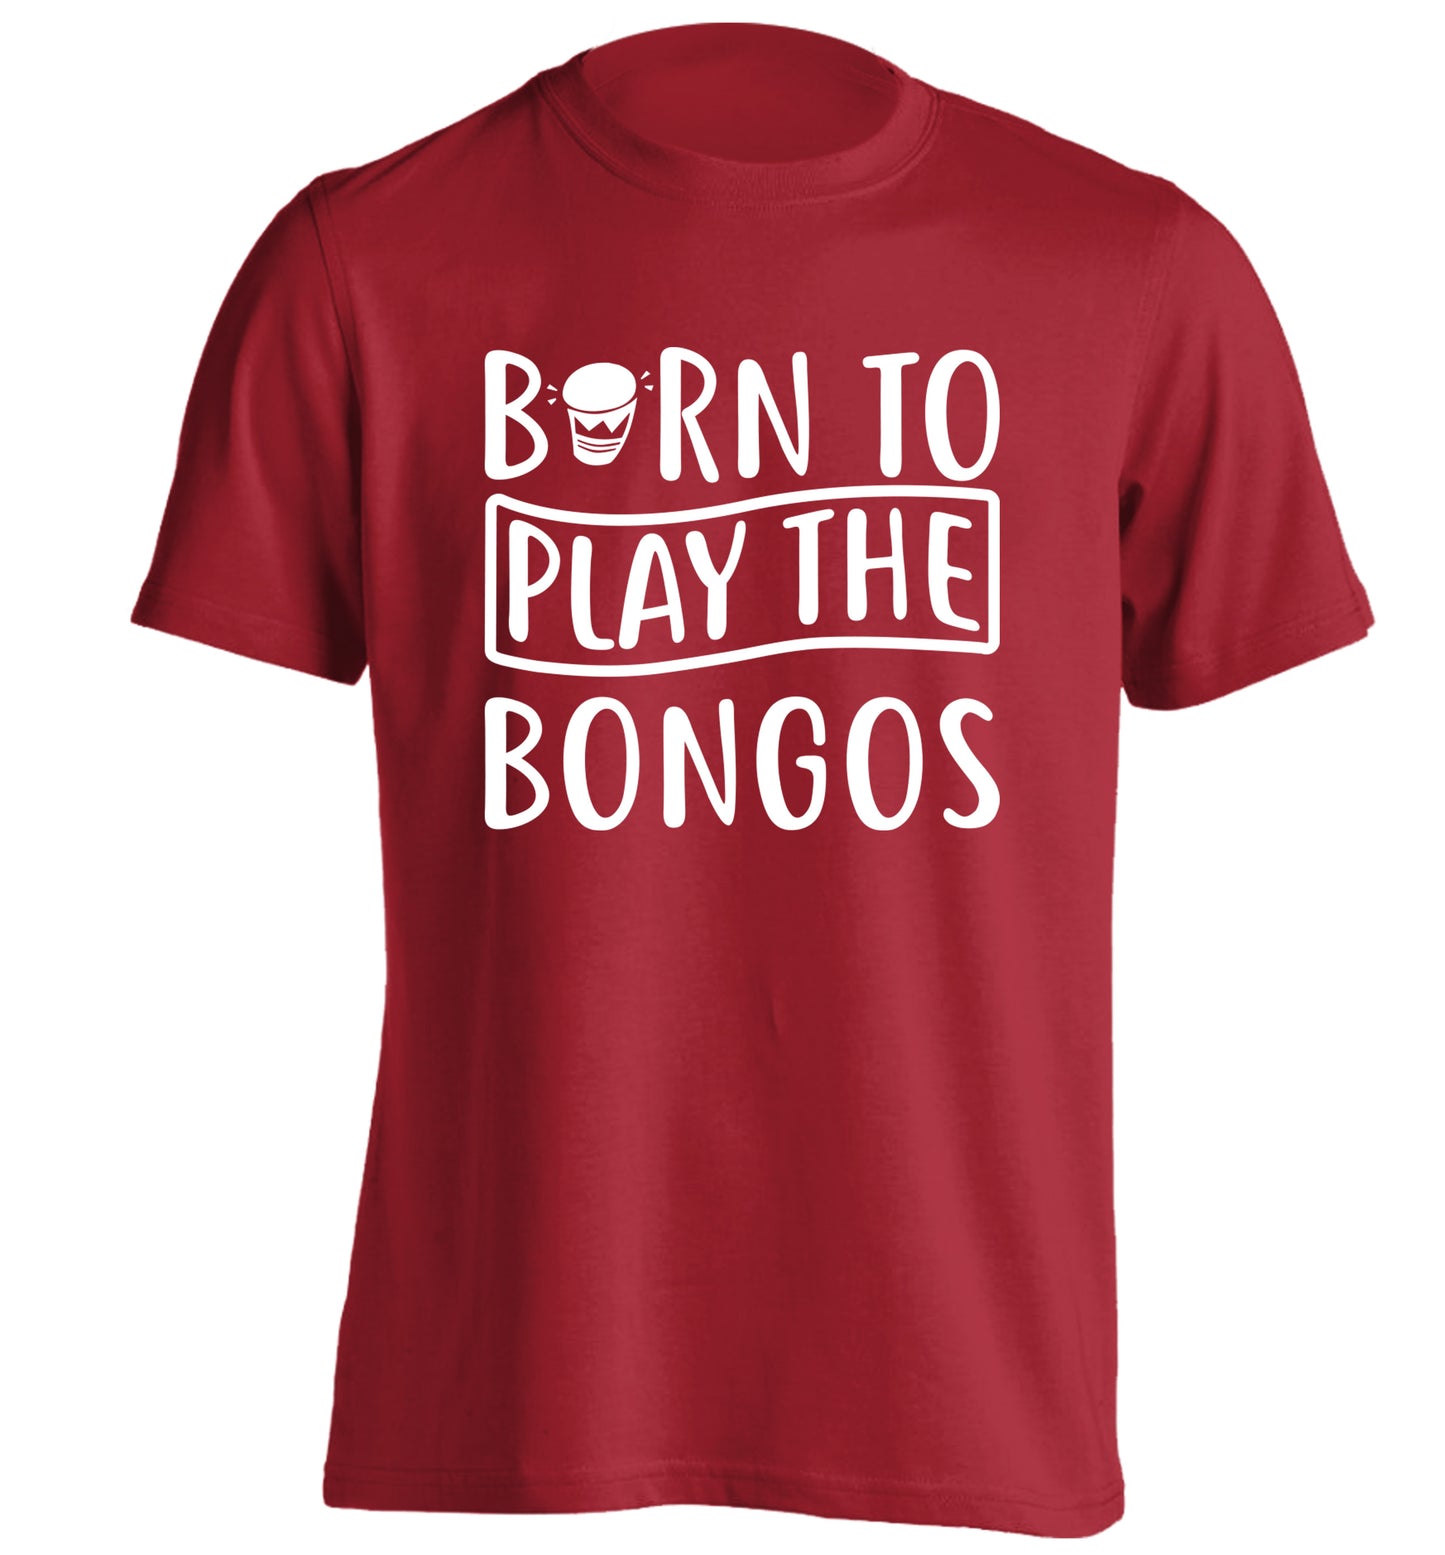 Born to play the bongos adults unisex red Tshirt 2XL